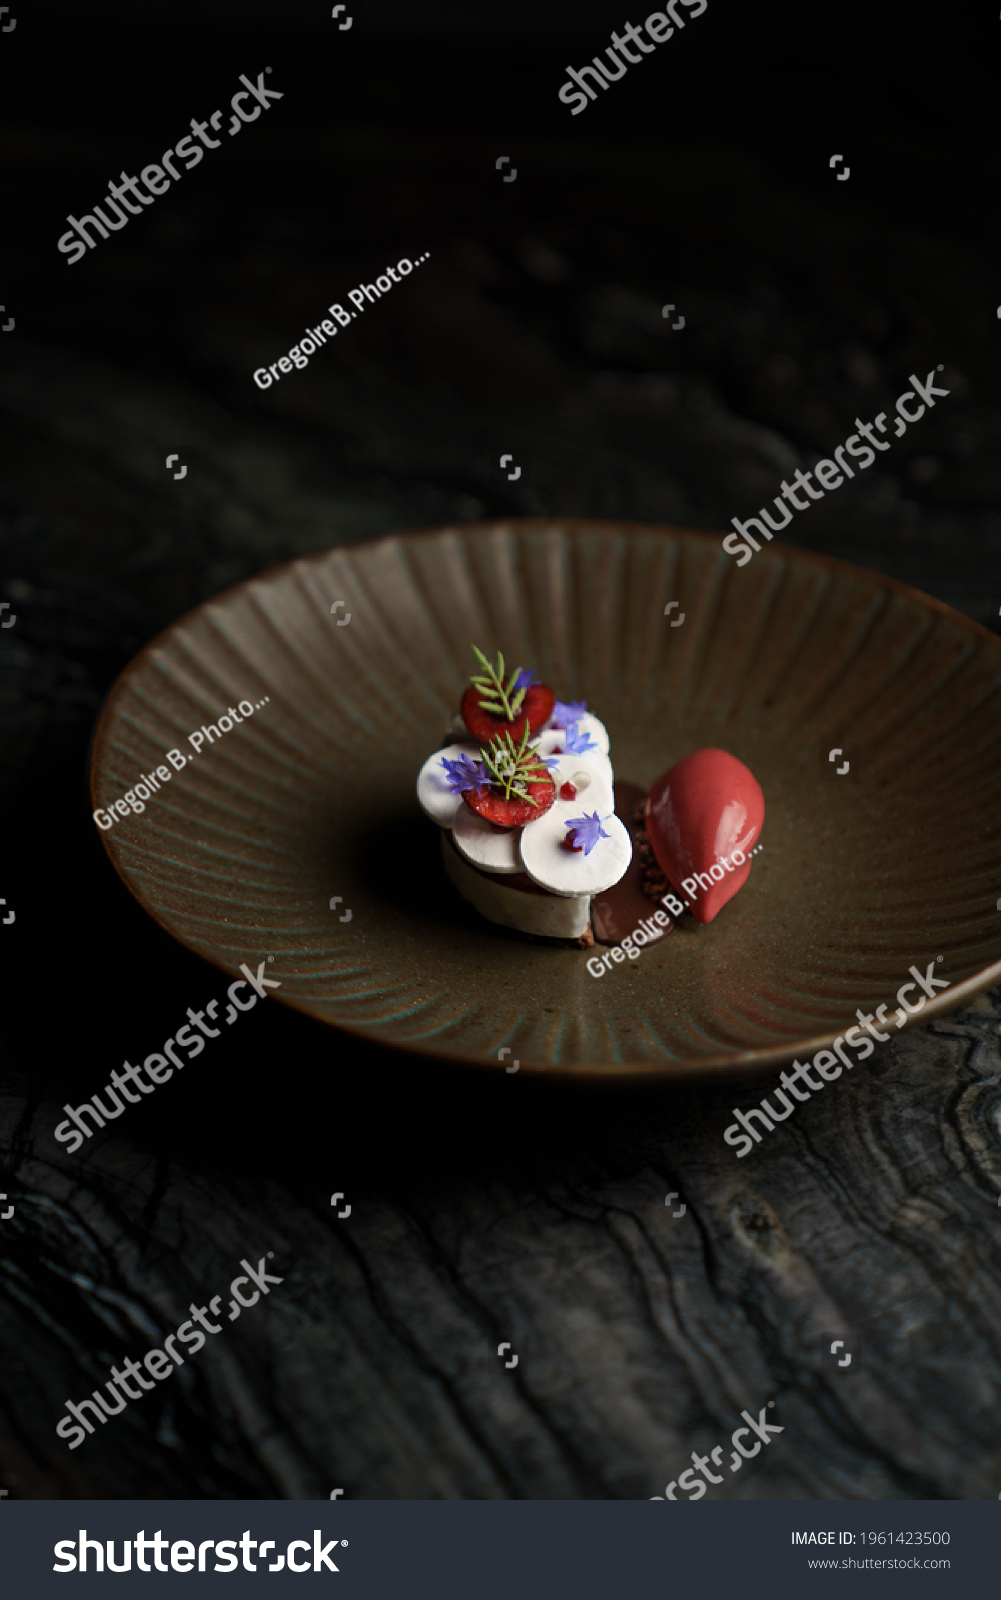 Food Photography Chocolates, pastries as well as plated desserts creation and much more... #1961423500